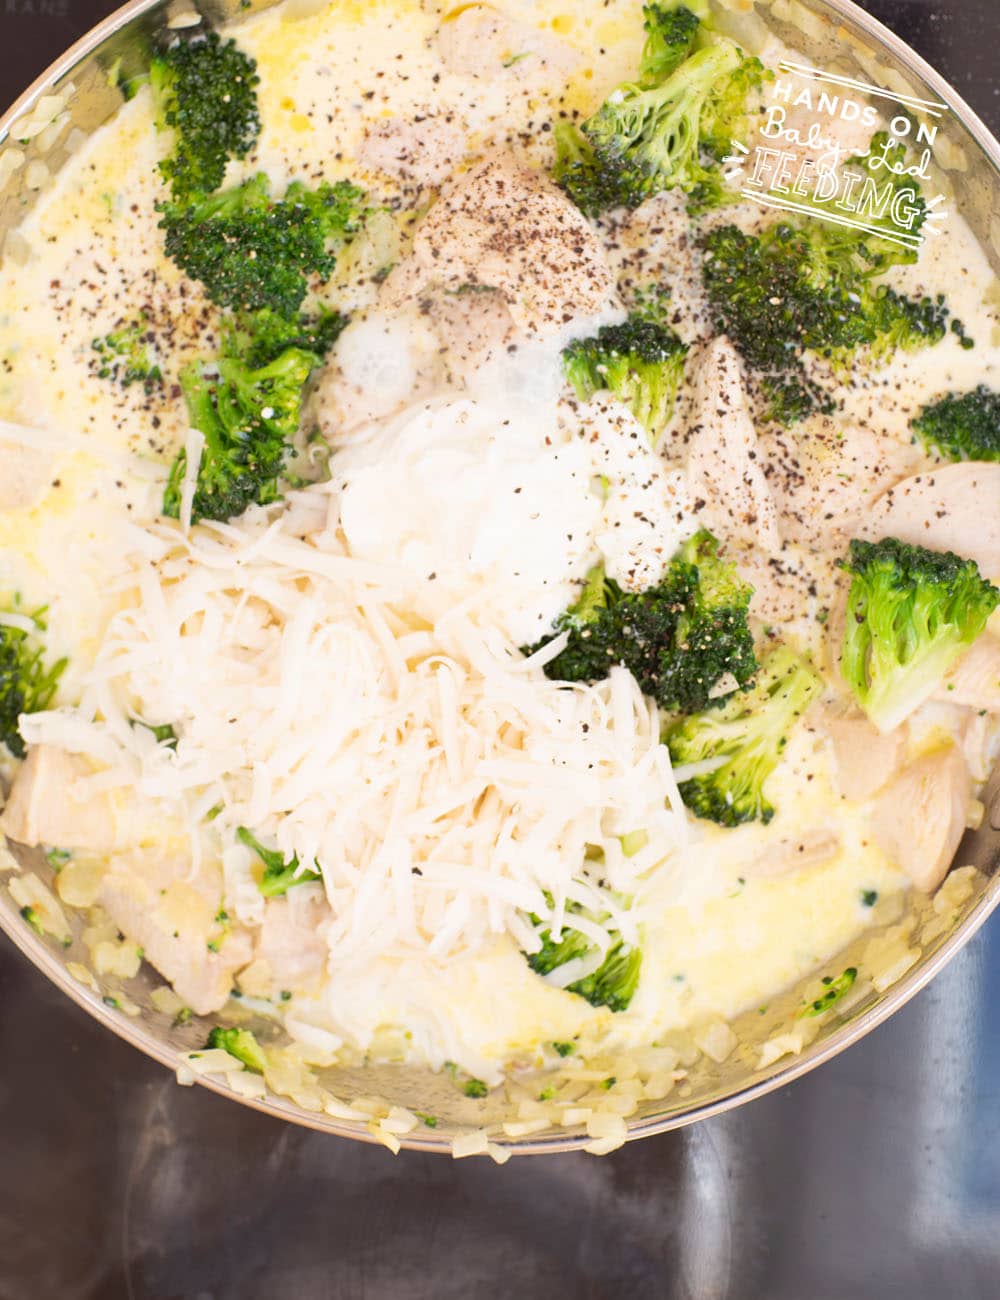 Chicken and Broccoli Pasta Bake Recipe Images6